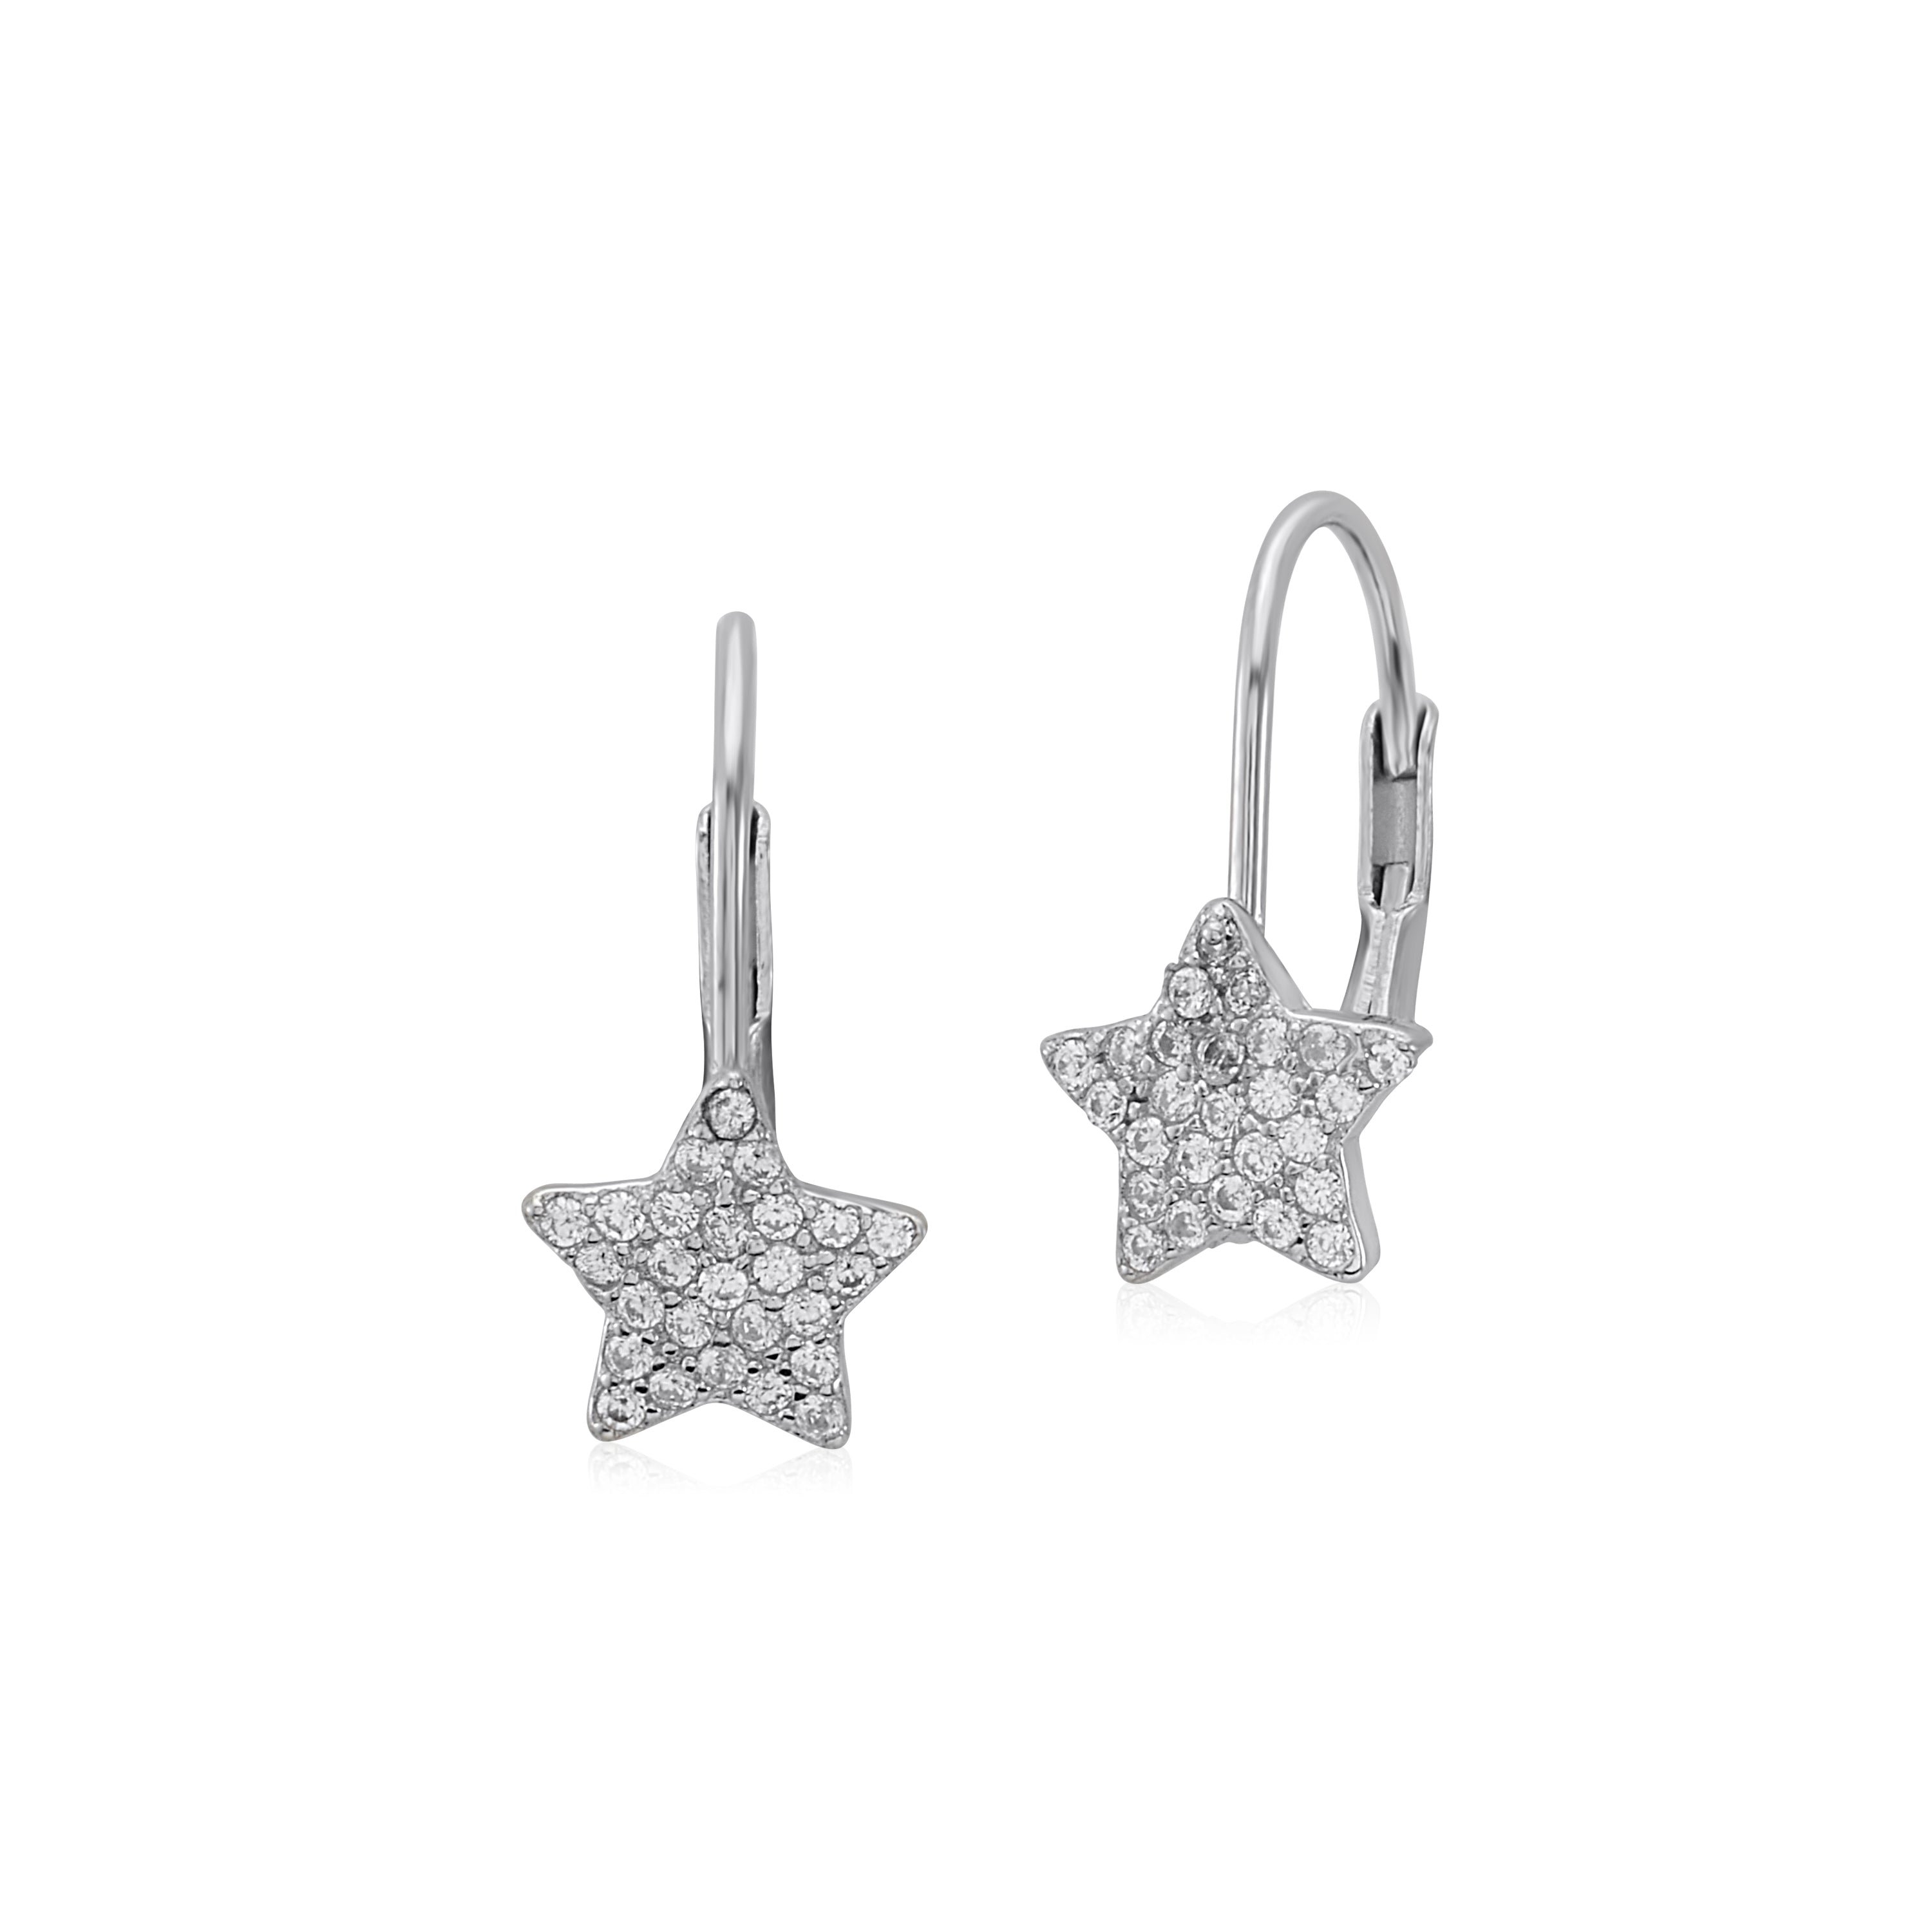 UNICORNJ Sterling Silver 925 Pink or Purple Star Leverback Earrings with Pave CZ Italy